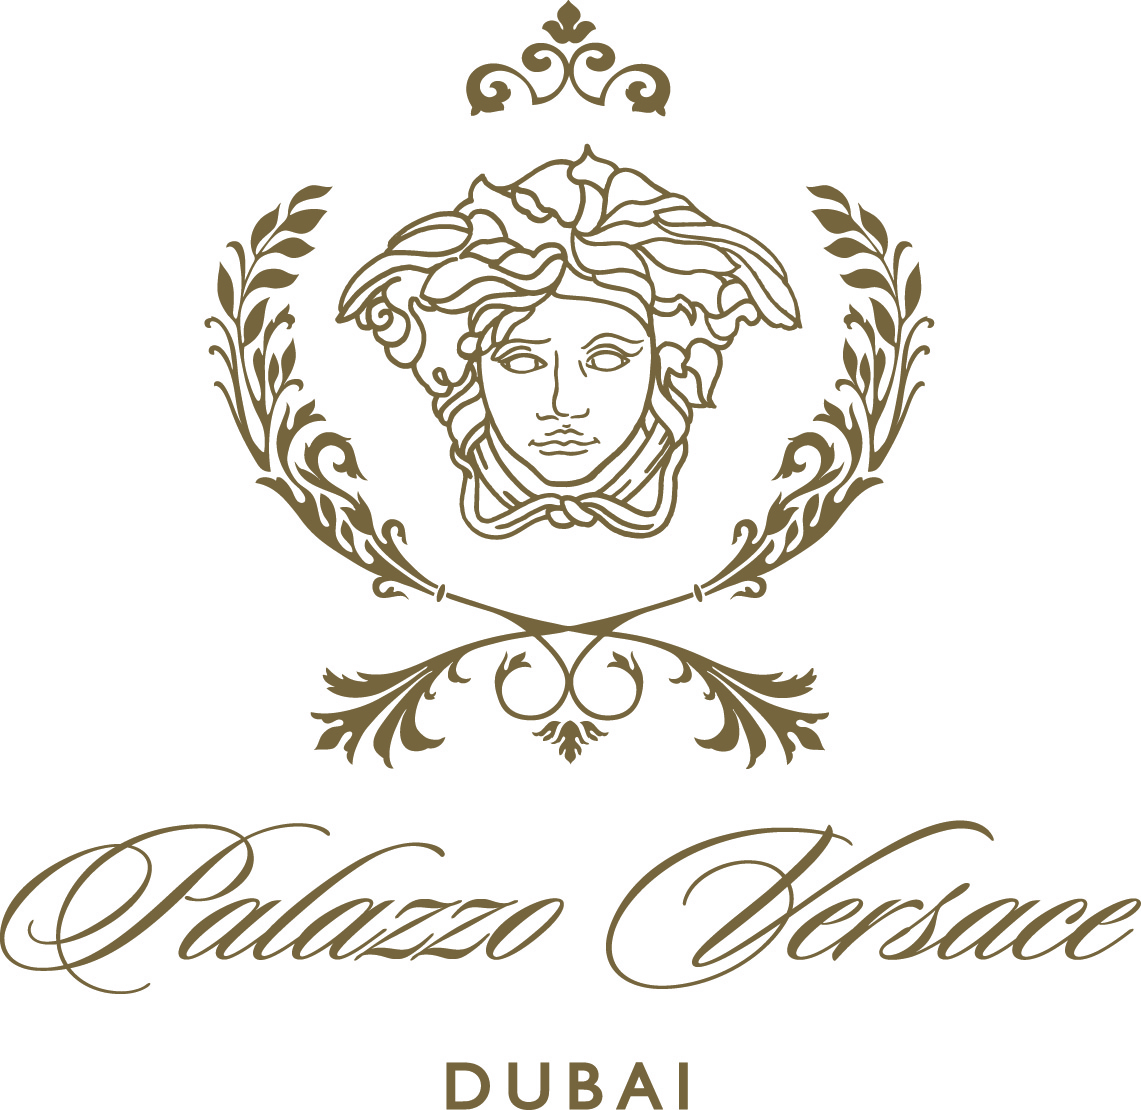 Exclusive summer deals available now at Palazzo Versace Dubai